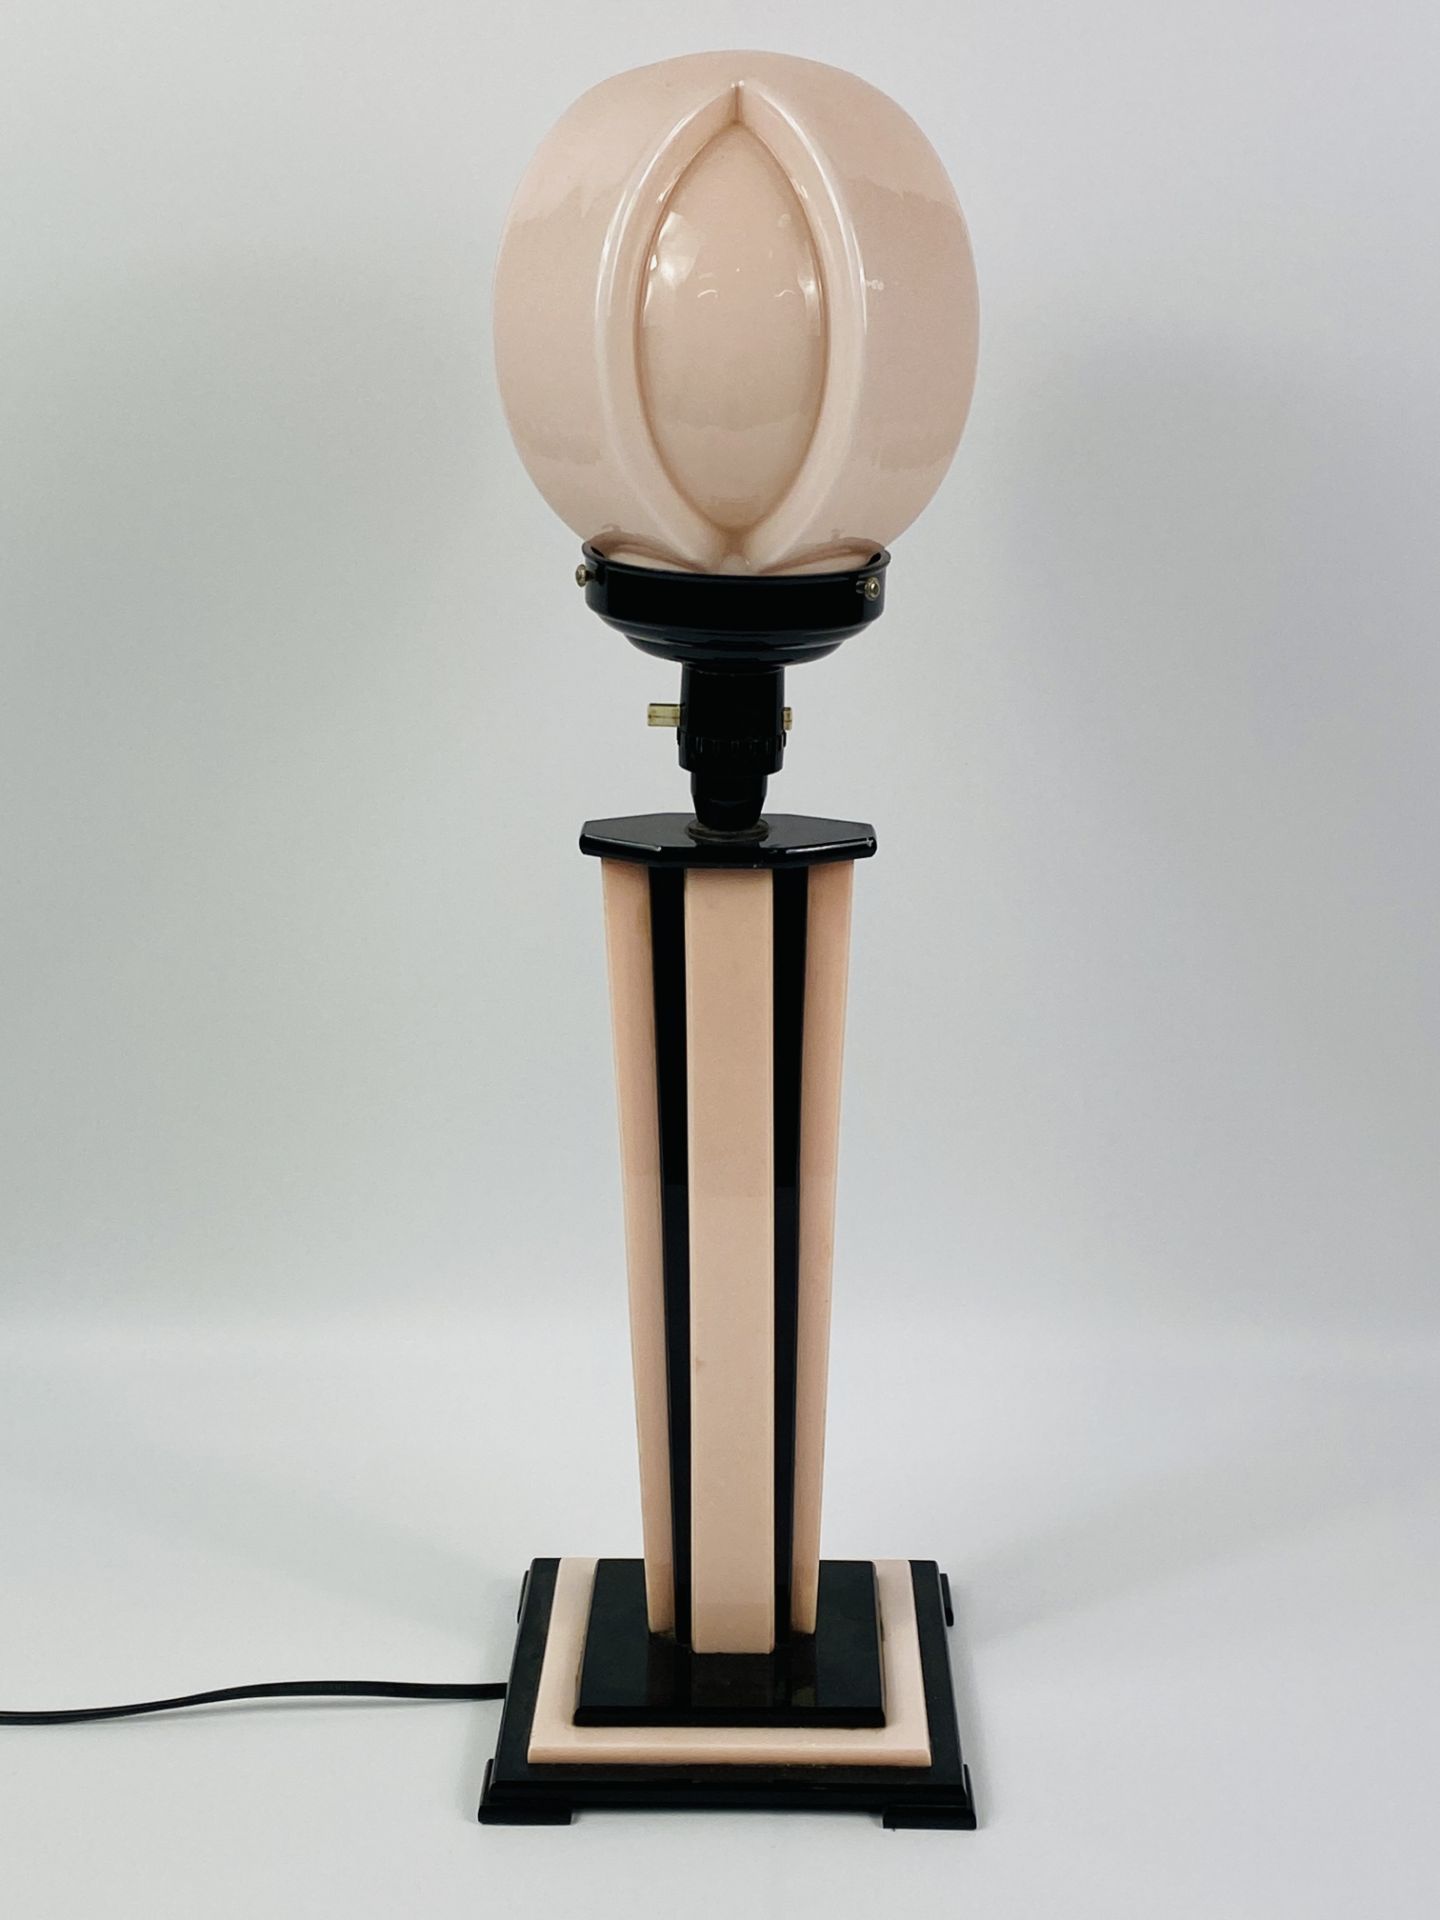 Art deco table lamp - Image 5 of 6